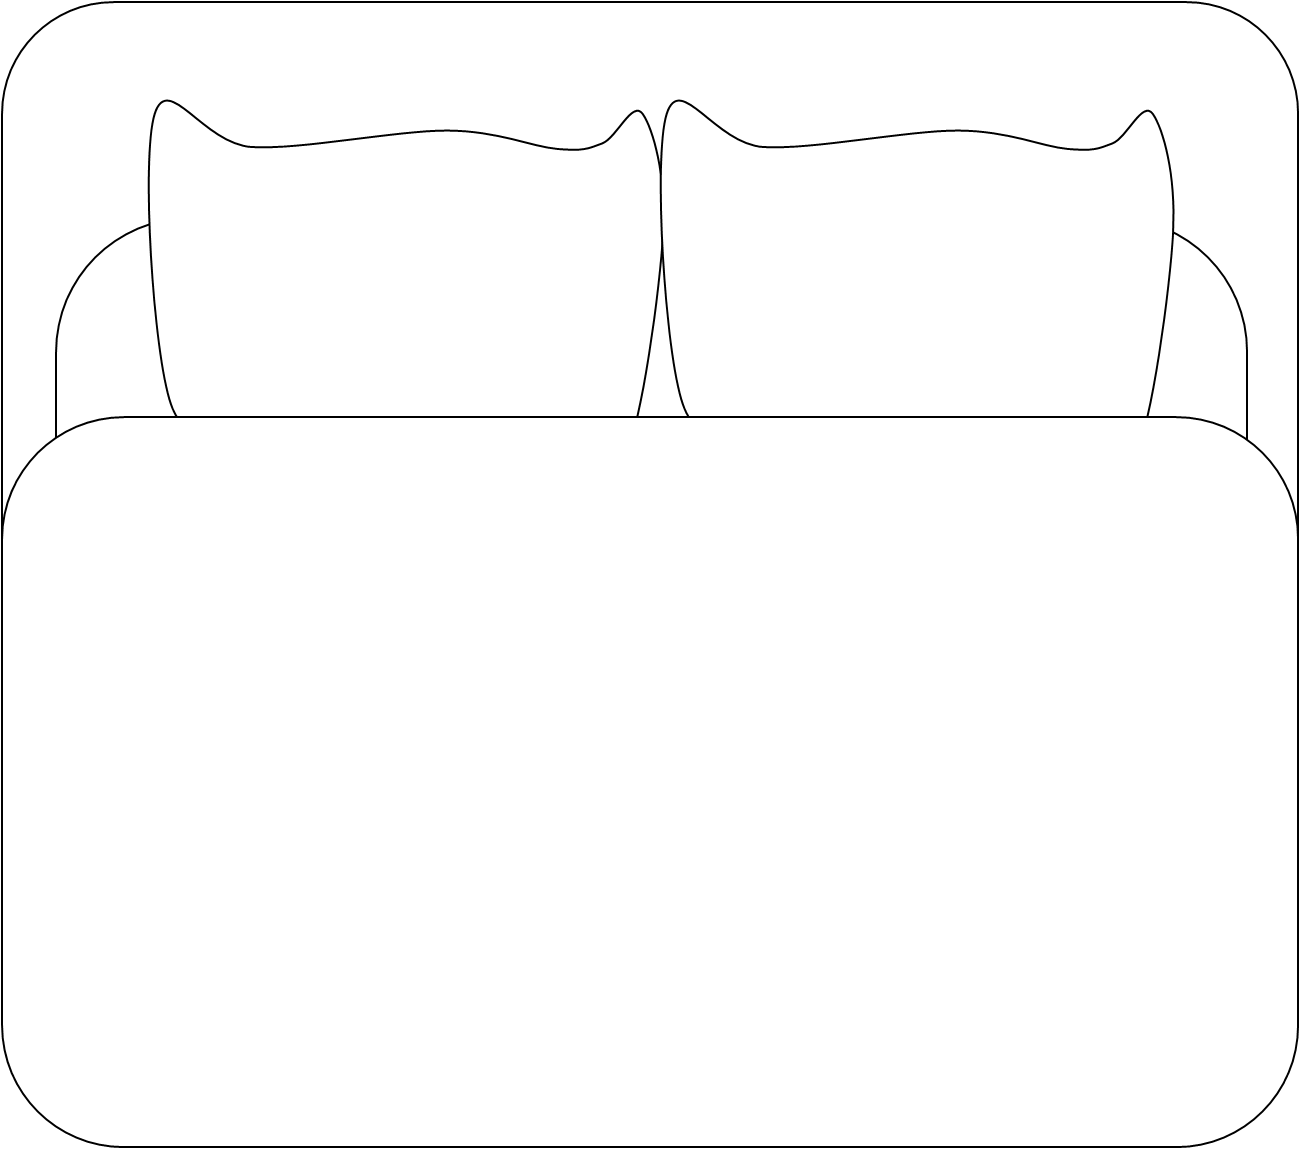 Bed Bw image - vector clip art online, royalty free & public domain